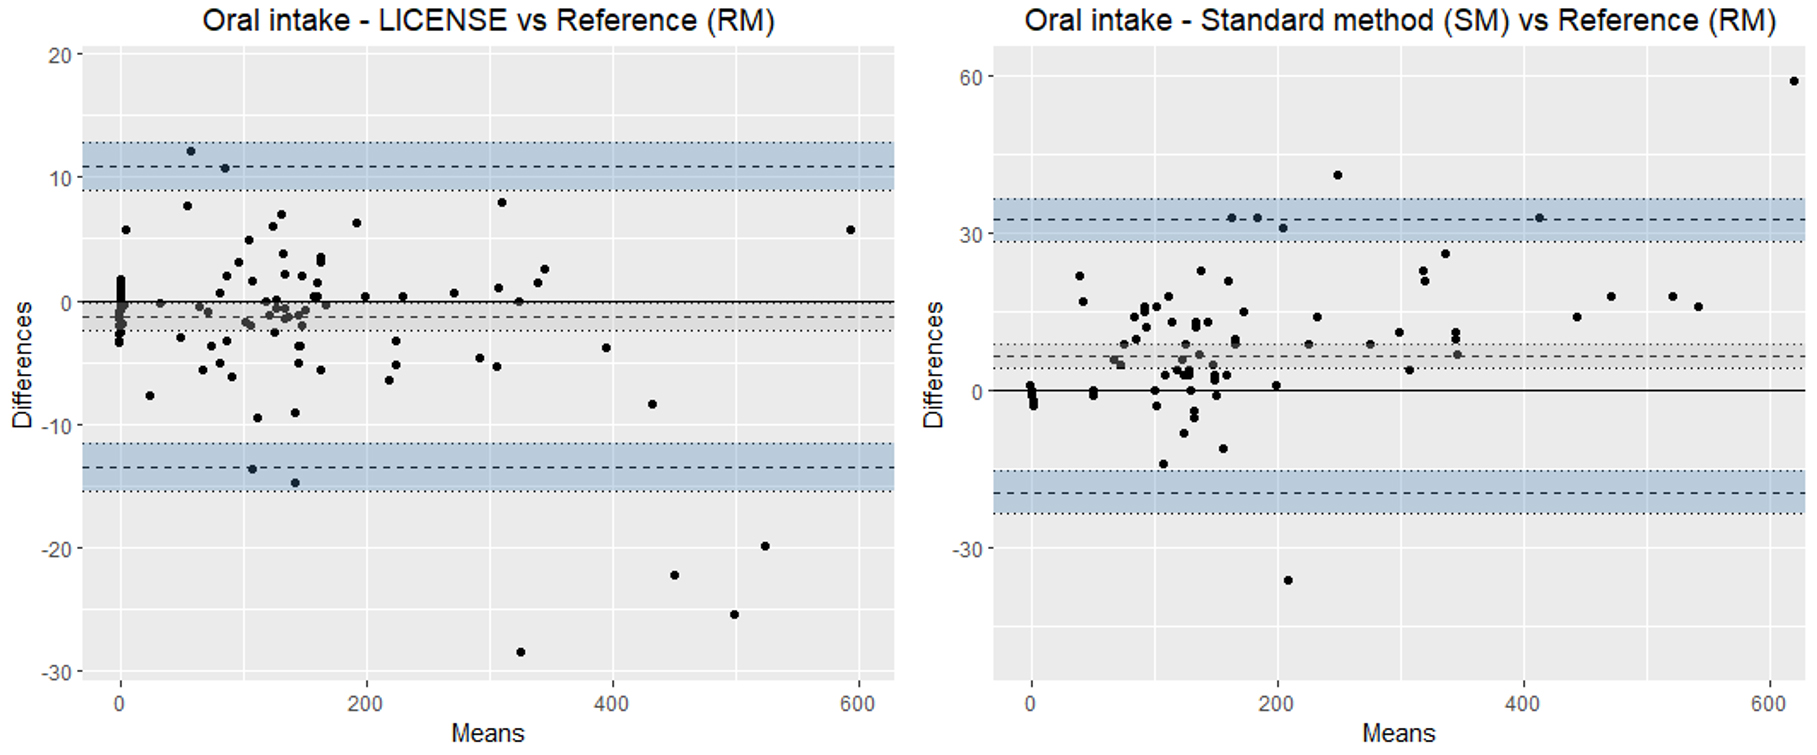 Bland-Altman plots illustrating the agreement of LICENSE with the reference measurement (RM) (left) and standard method with the reference measurement (RM) (right) in measuring oral fluid intake. Note the different scales on the y-axes.